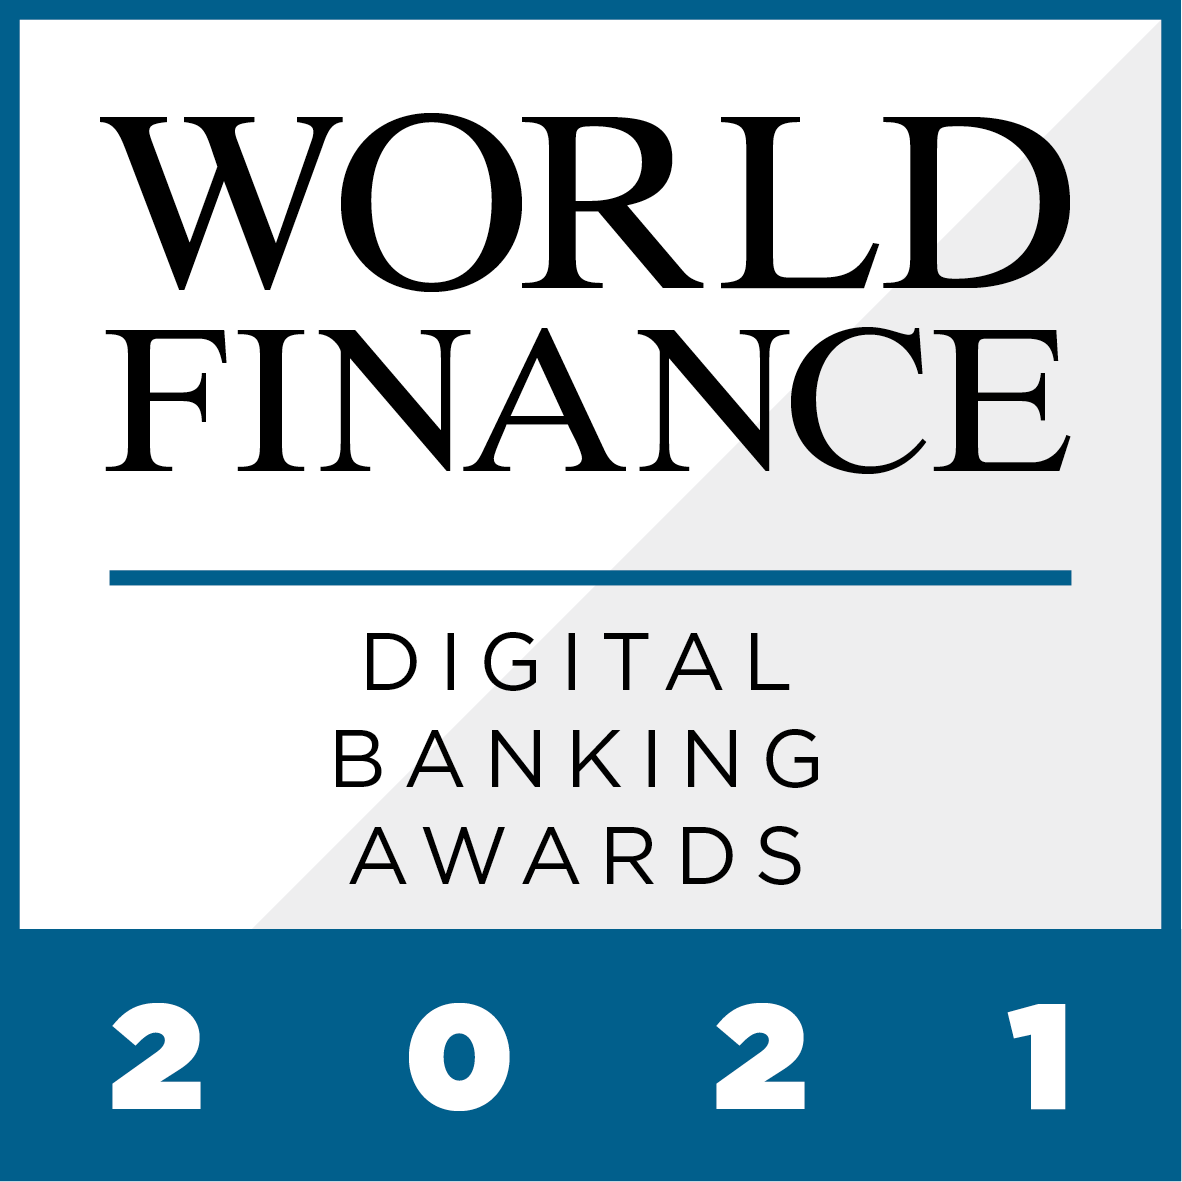 Please see below the full list of the Digital Banking Awards 2021, as awarded by World Finance magazine